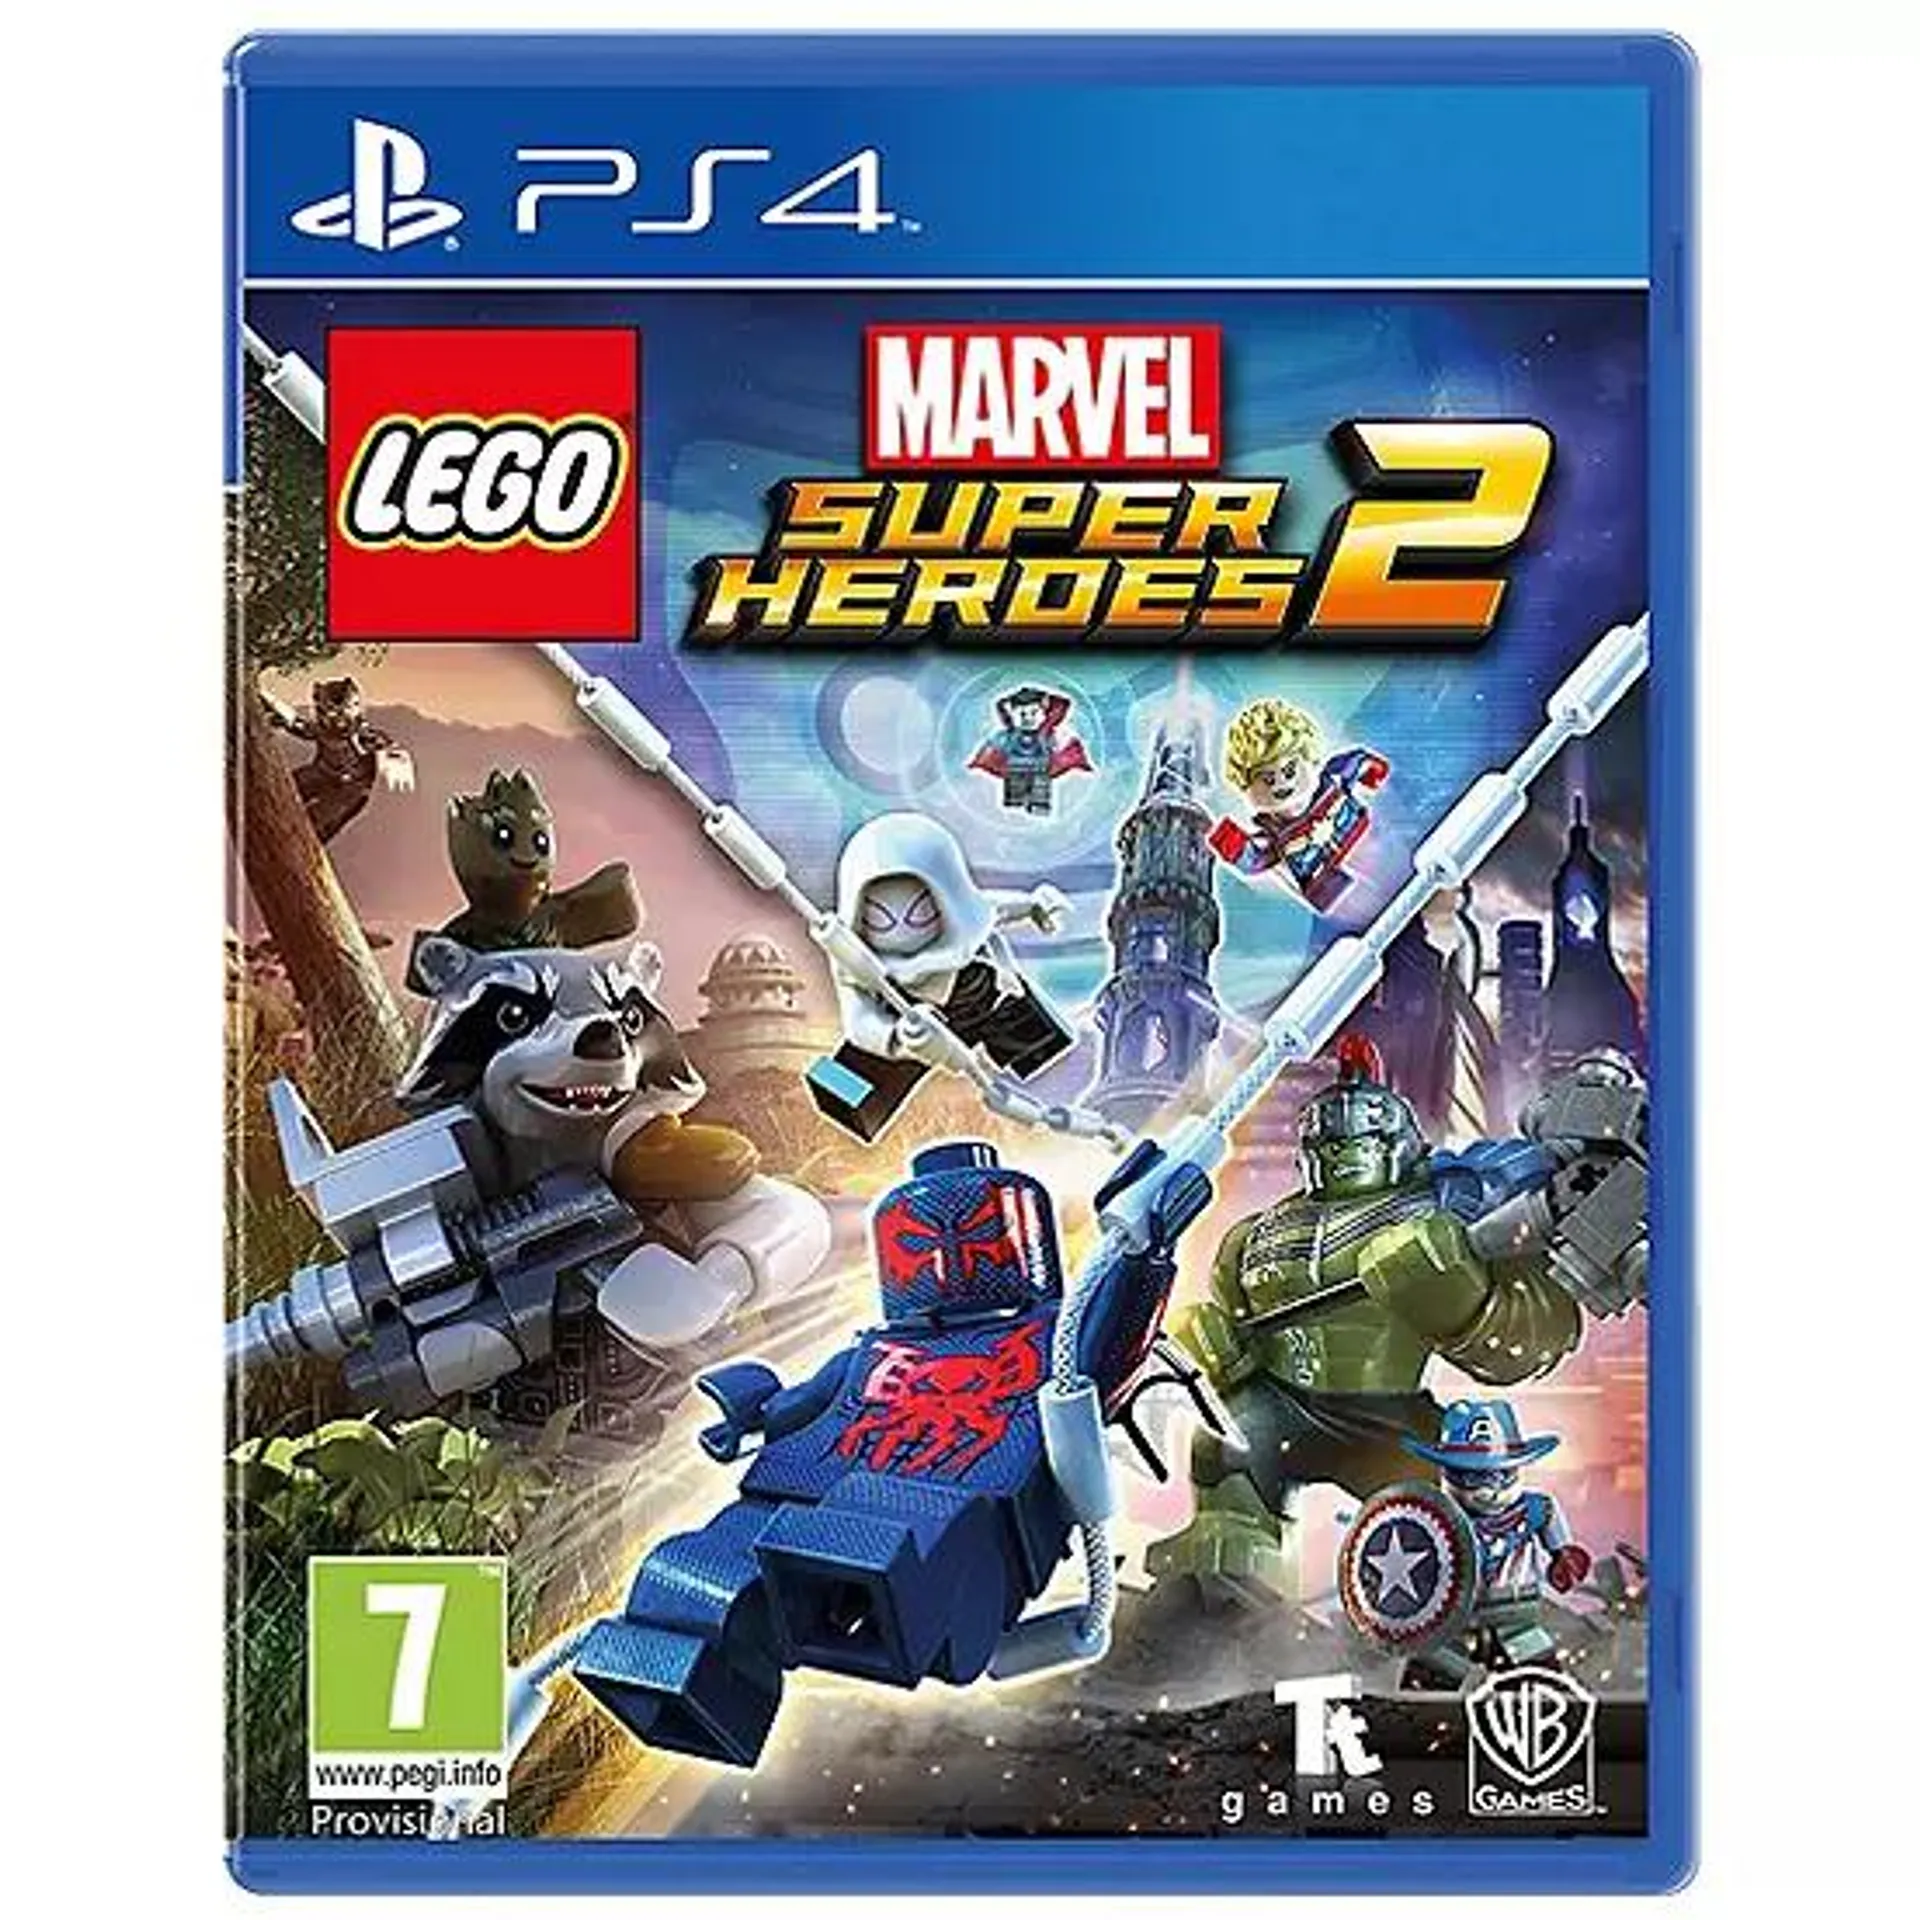 Sony PS4 Lego Marvel Super Heroes 2 (7+)